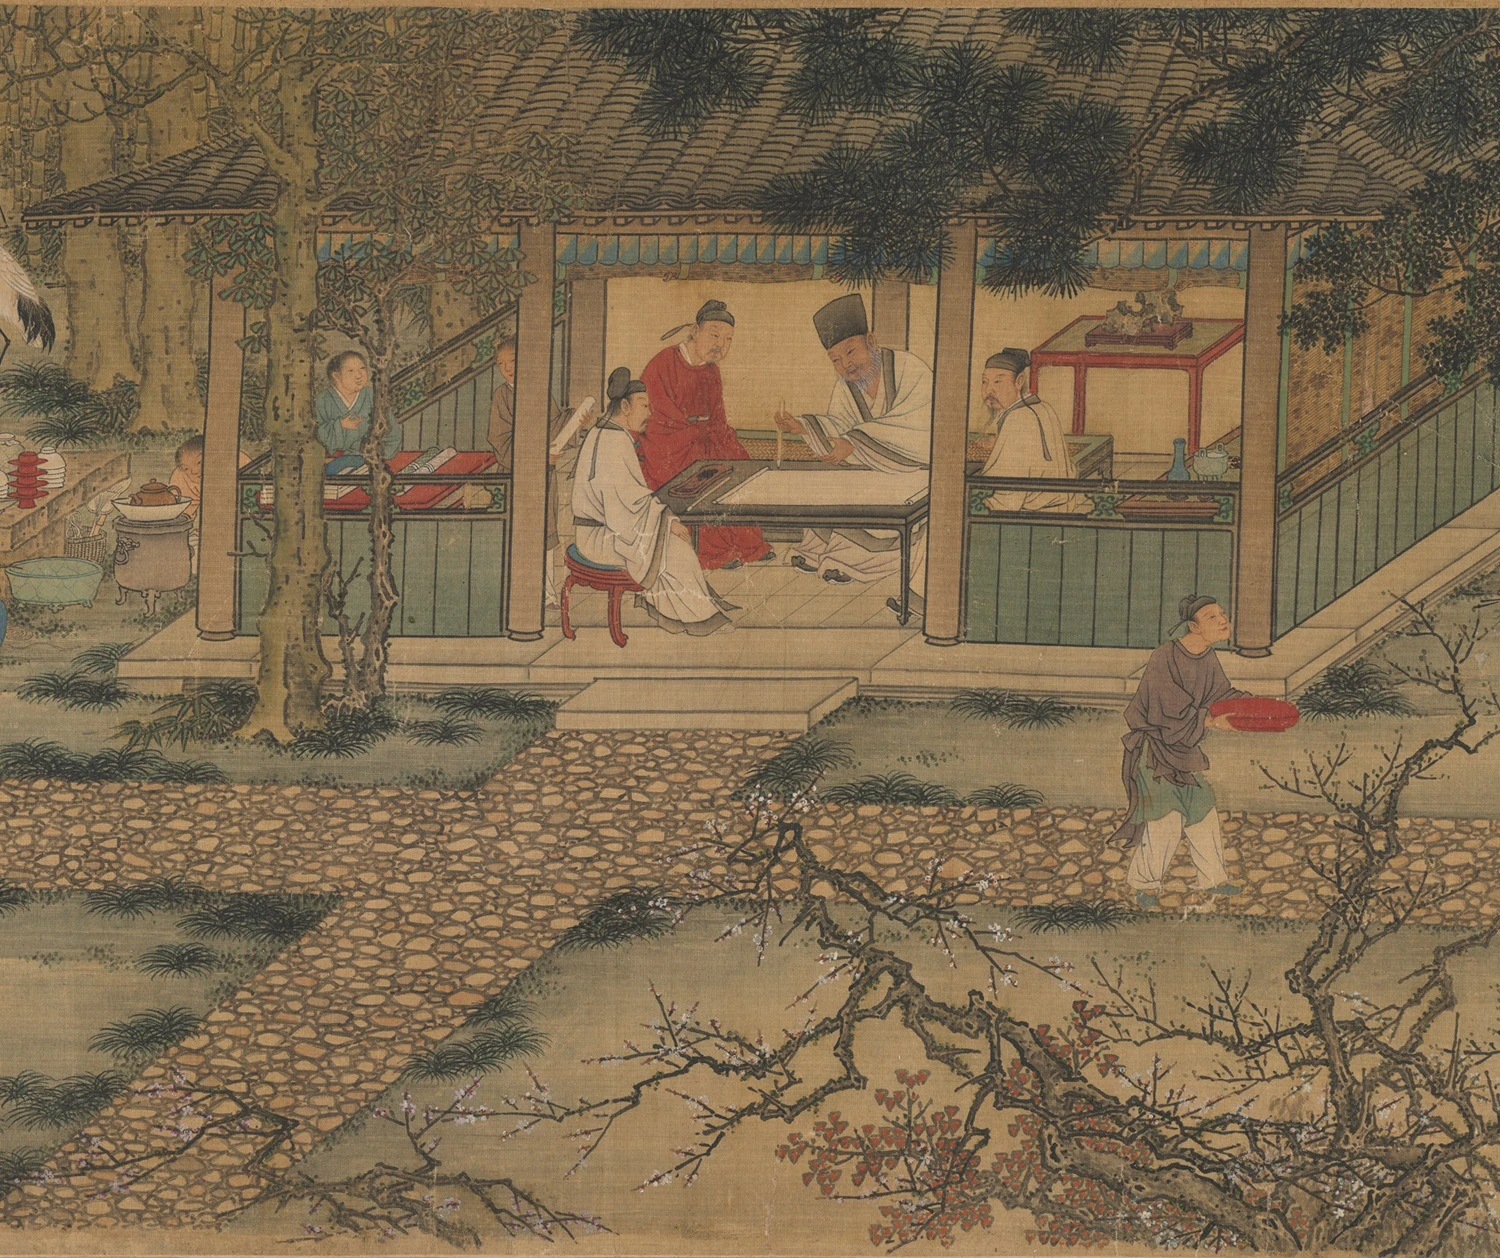 Attributed to Xie Huan, <i>The Nine Elders of the Mountain of Fragrance</i> (detail), 1426–52. Handscroll, ink and color on silk painting, 29.4 ny 148.9 cm. The Cleveland Museum of Art, Bequest of Mrs. A. Dean Perry 1997.99-圖片